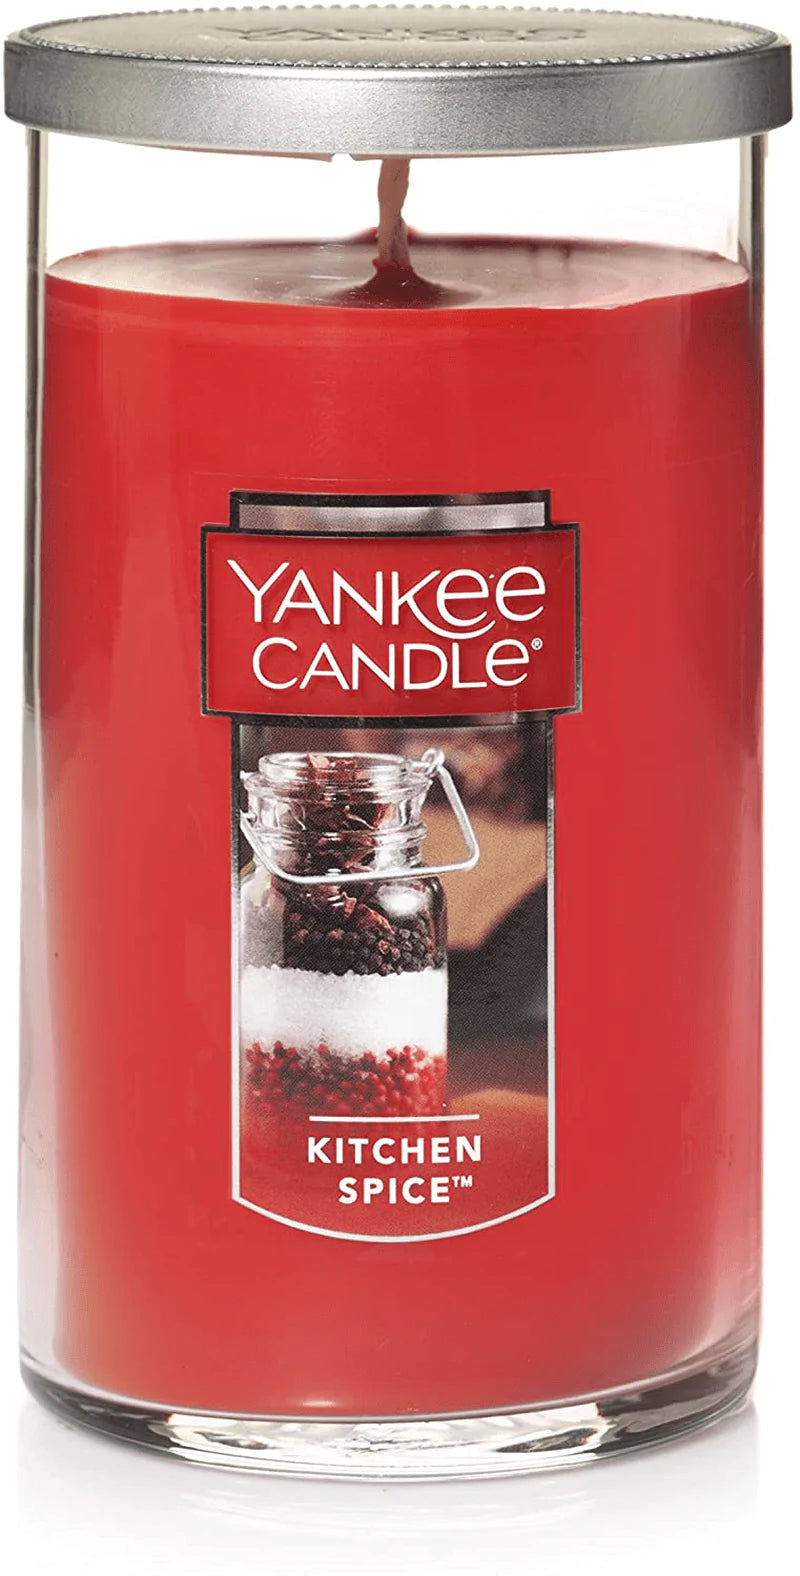 Yankee Candle Large Jar Candle Home Sweet Home Home & Garden > Decor > Home Fragrances > Candles Yankee Candle Kitchen Spice Medium Perfect Pillar 